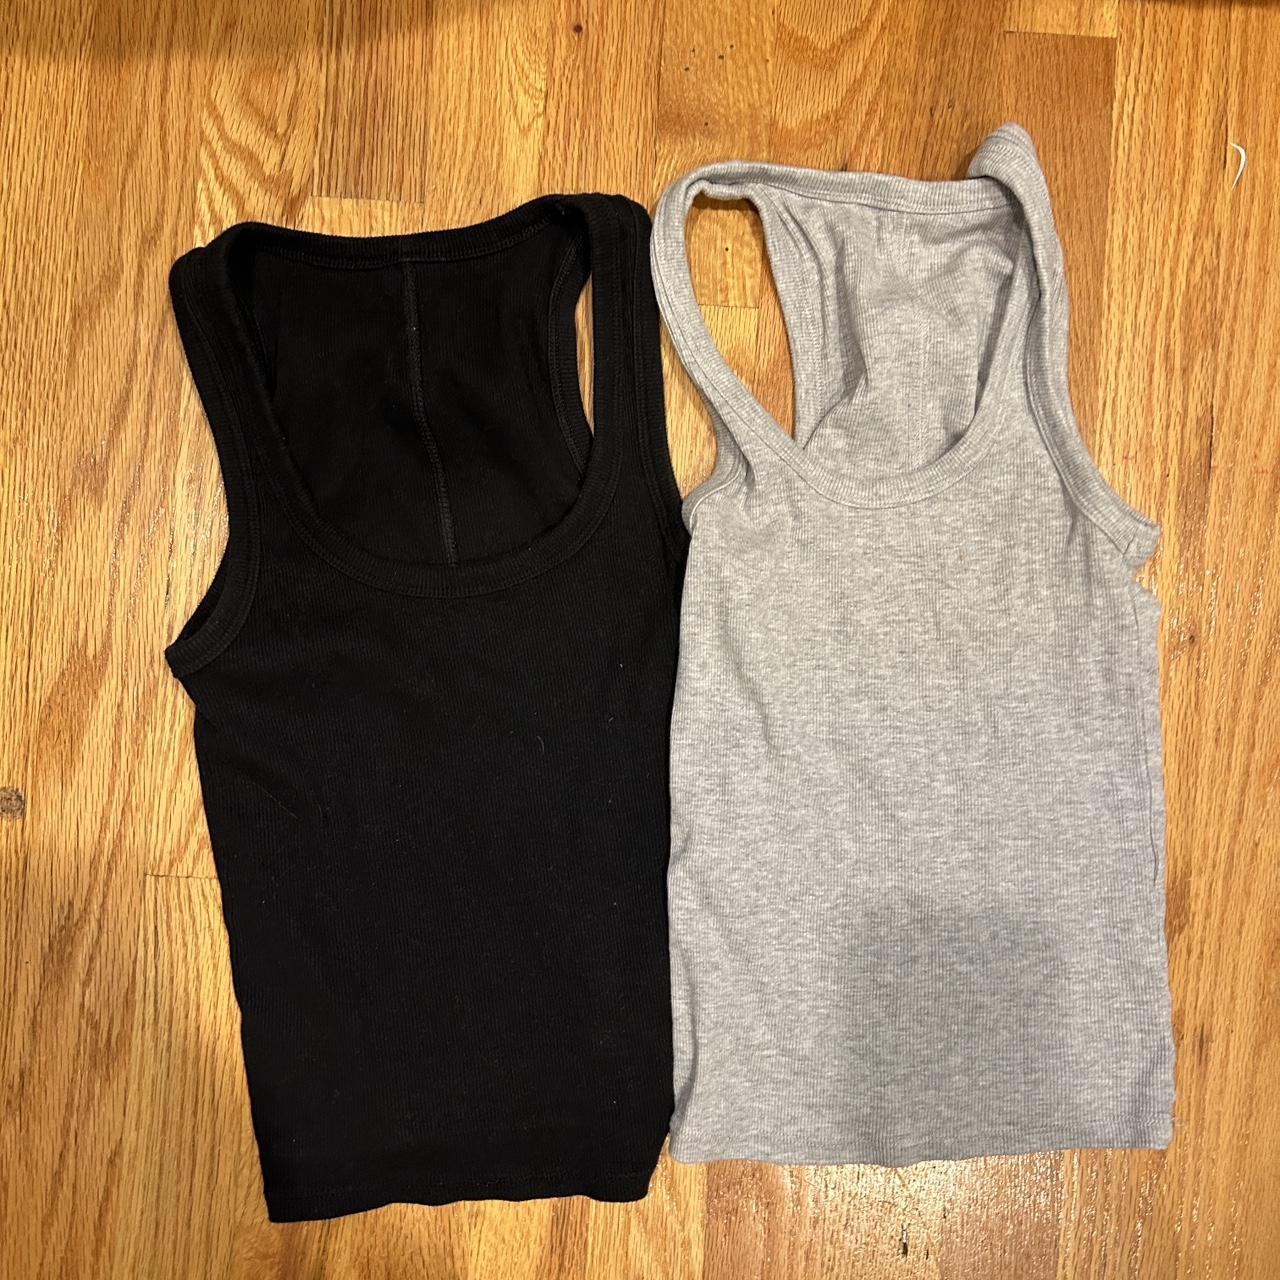 ZARA basic tanks— gray and black— size S CAN BE... - Depop